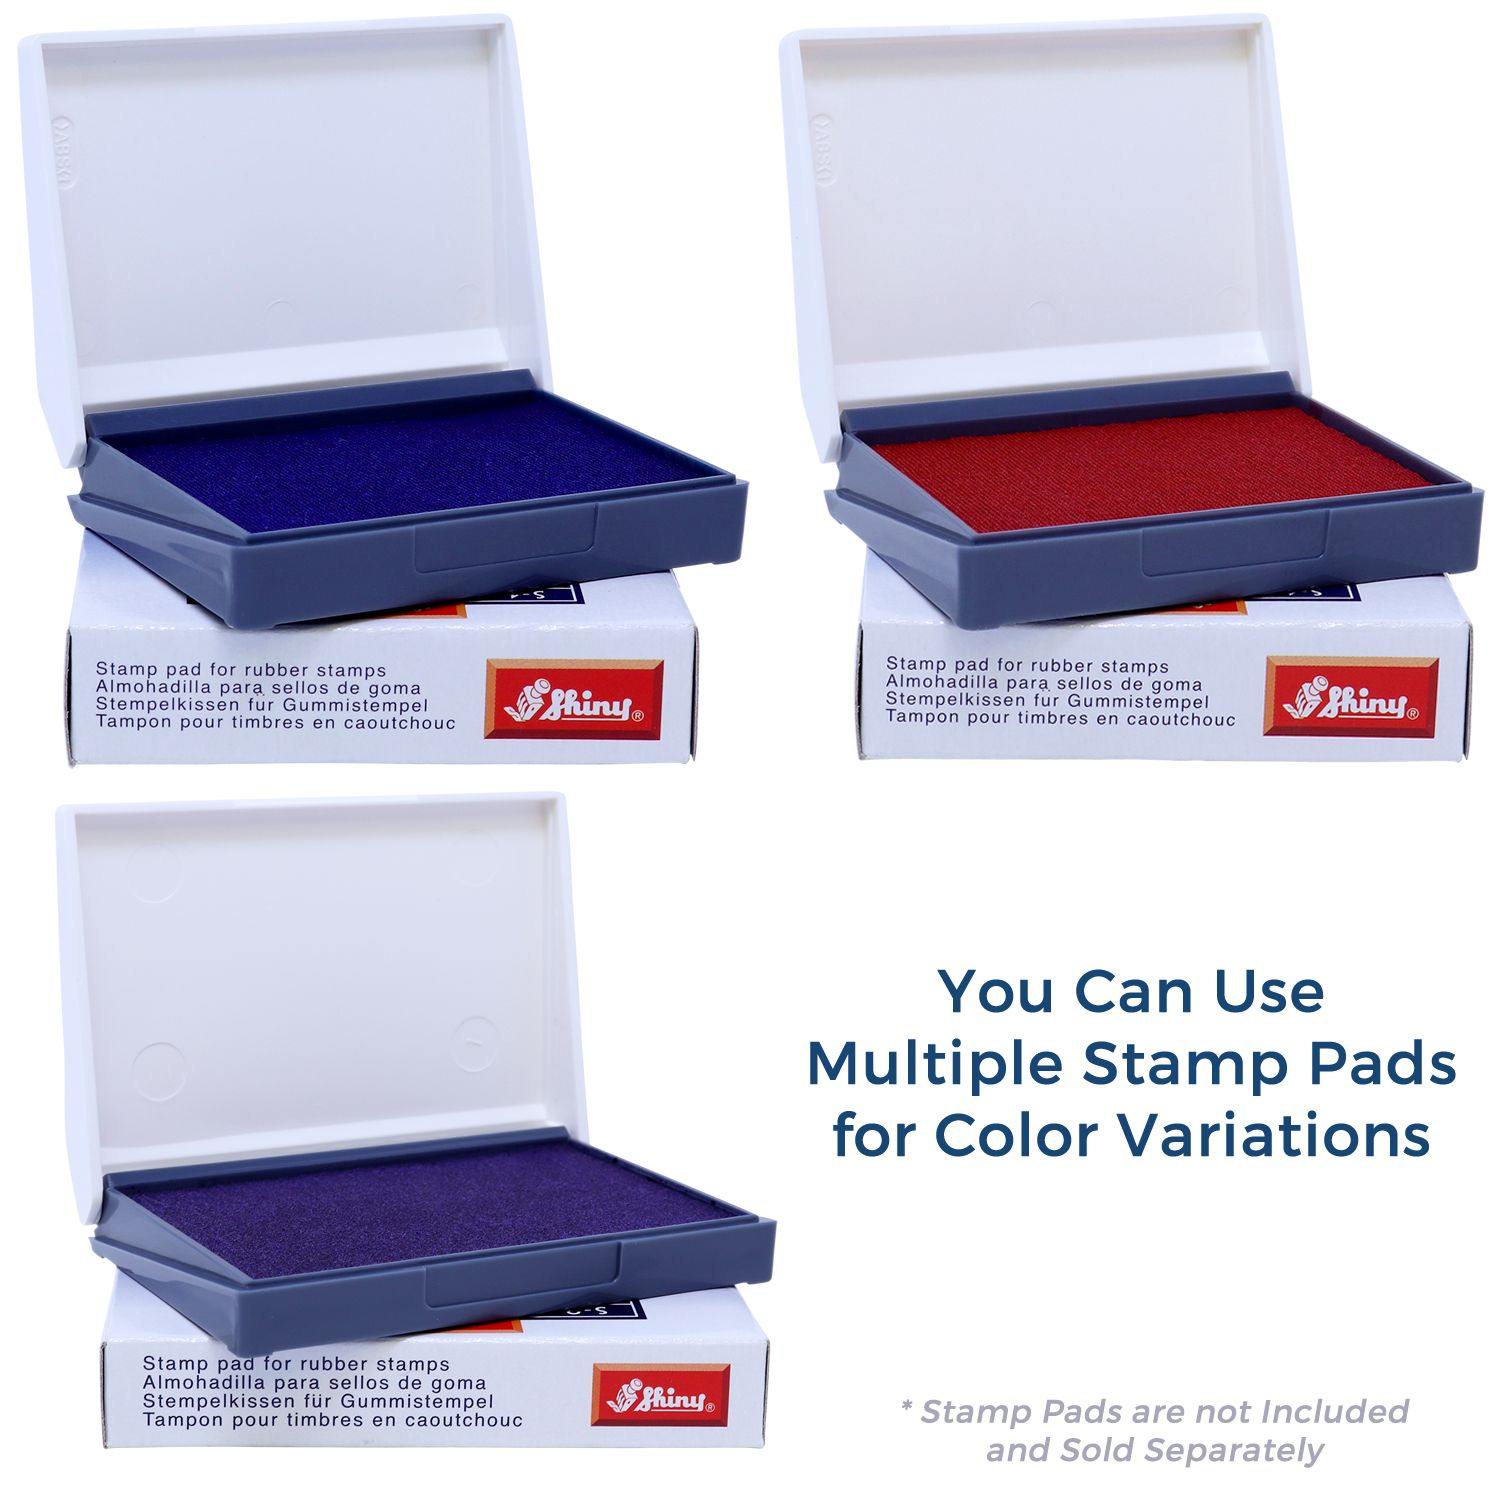 Stamp Pads for Attorneys' Copy Rubber Stamp Available